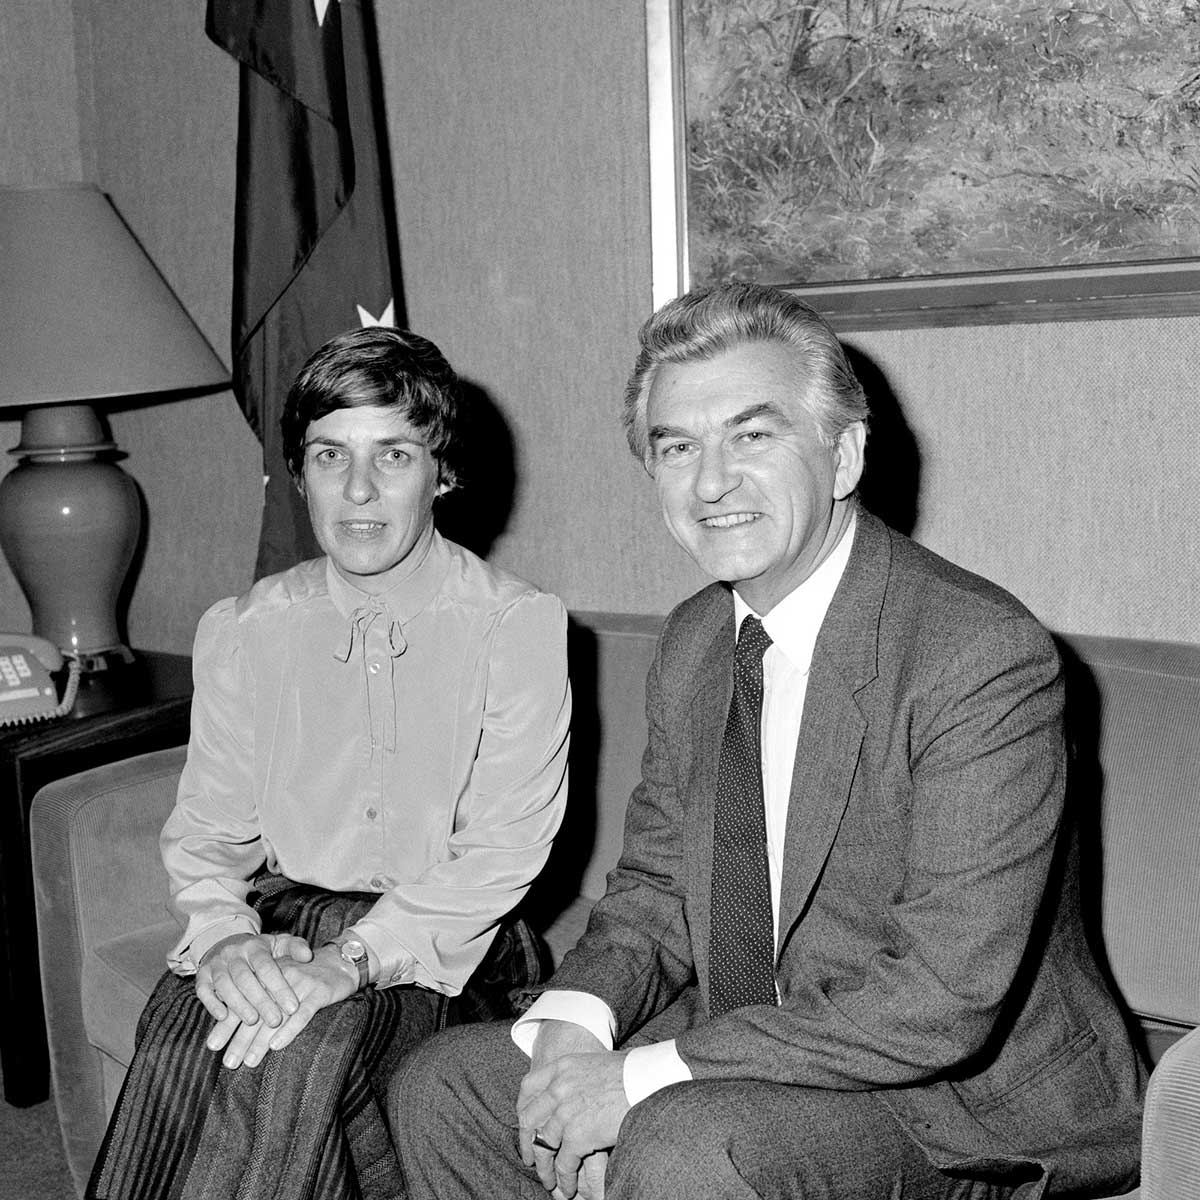 Pam O’Neill and Bob Hawke pose for the camera, seated on a couch.